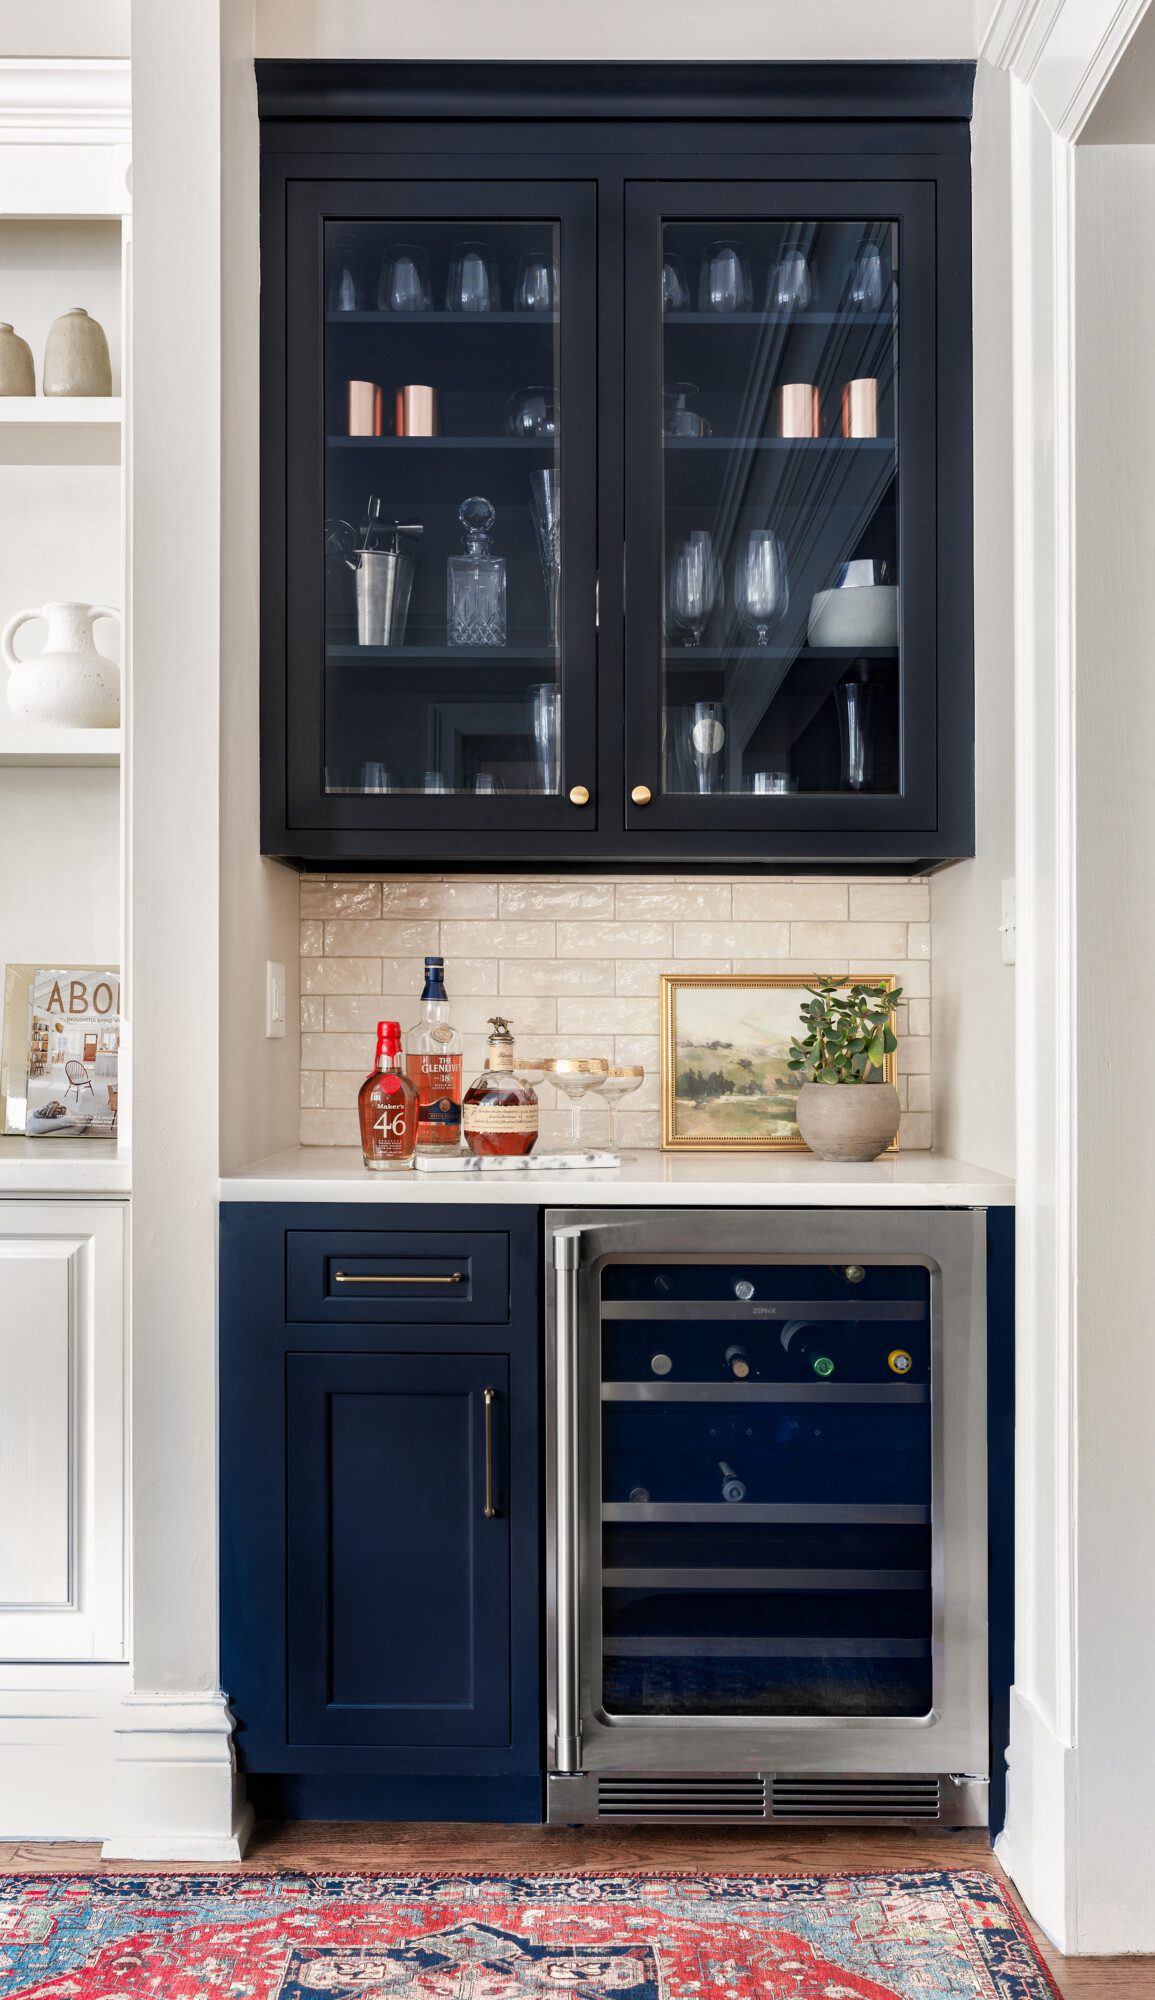 Bright bar area with white tile backsplash and navy blue cabinets